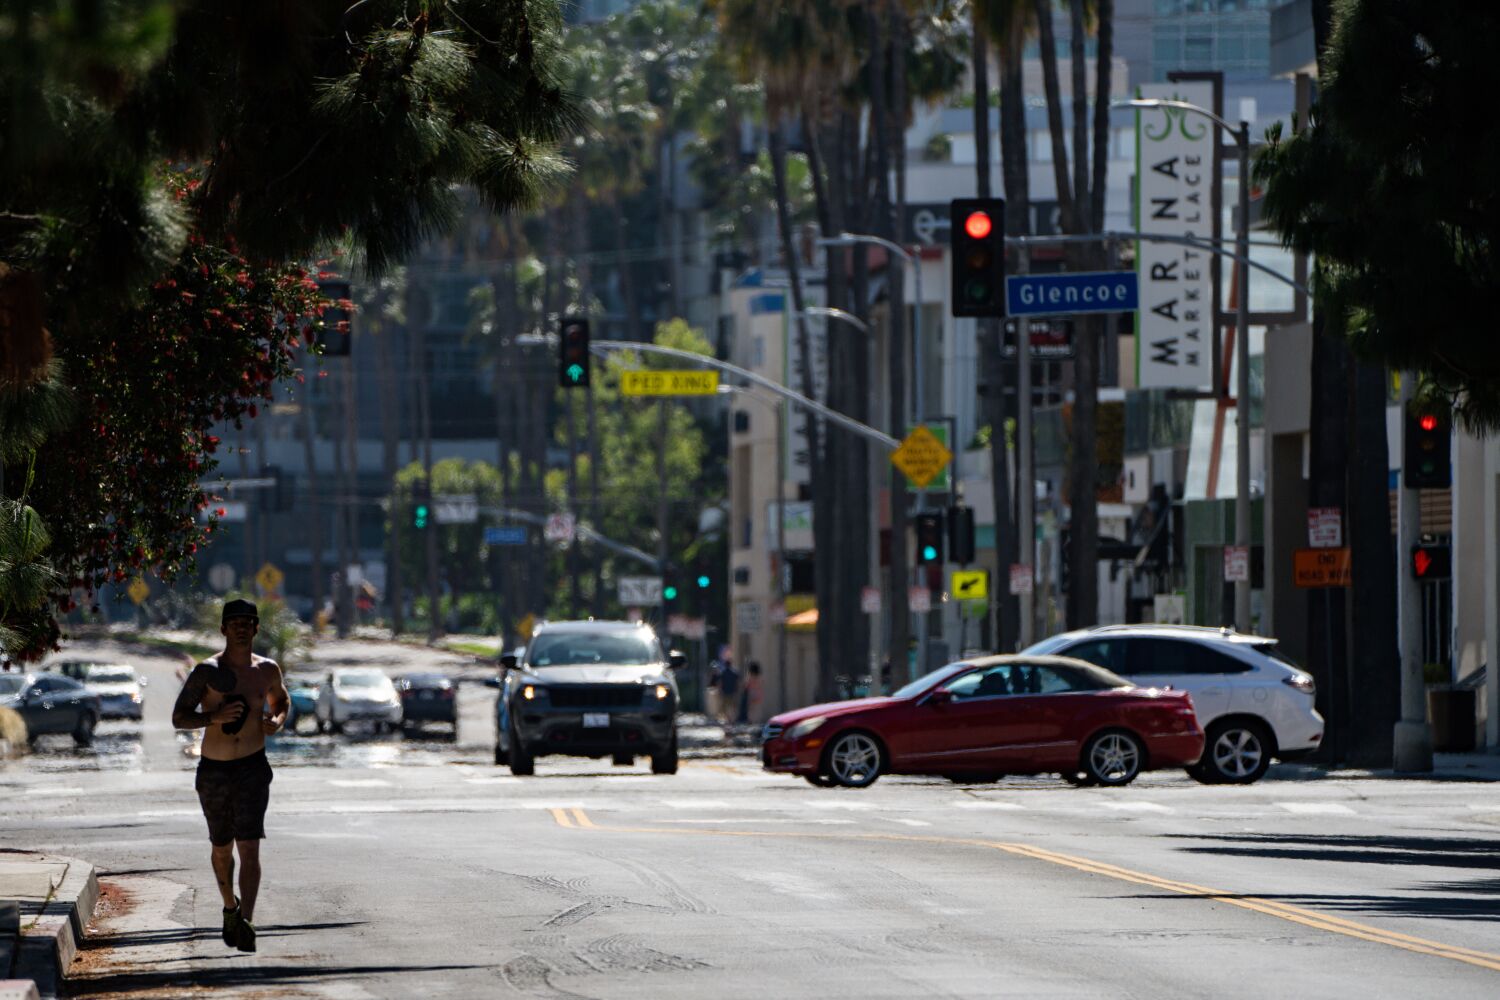 Op-Ed: Here's how to prevent pedestrian traffic deaths in Los Angeles